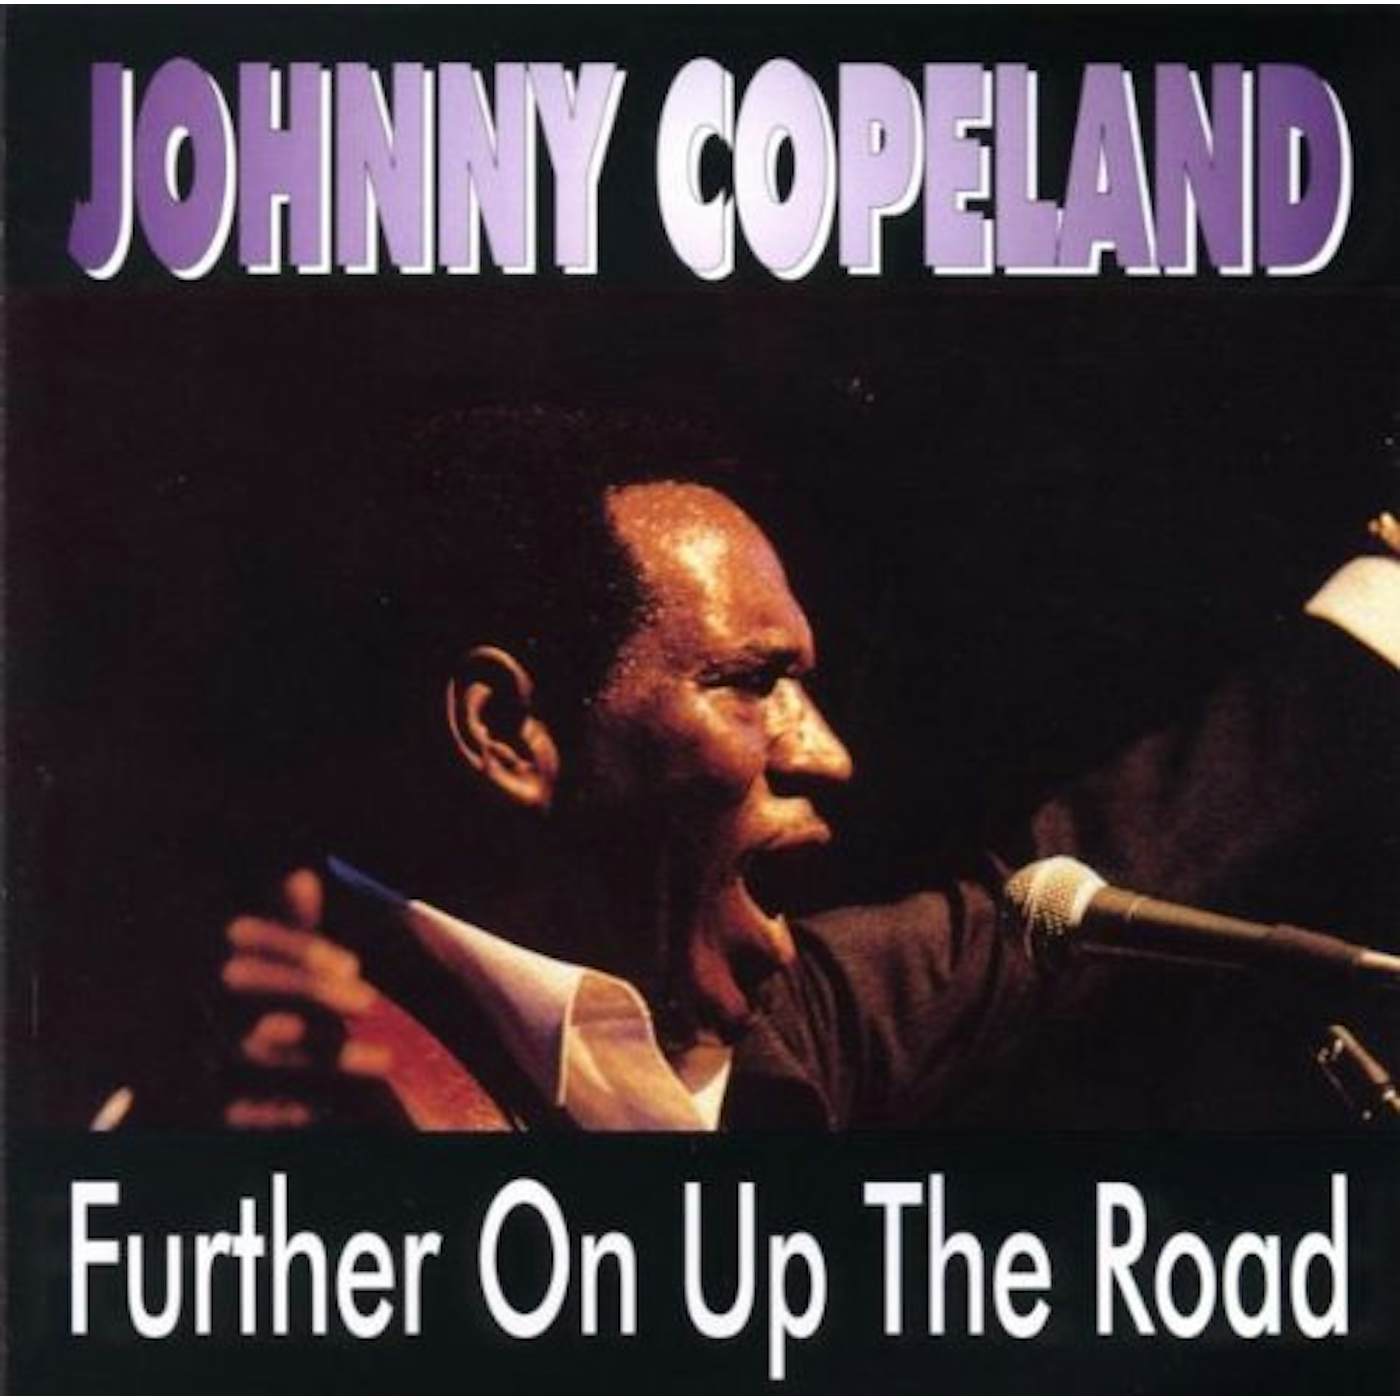 Johnny Copeland FURTHER ON UP THE ROAD CD